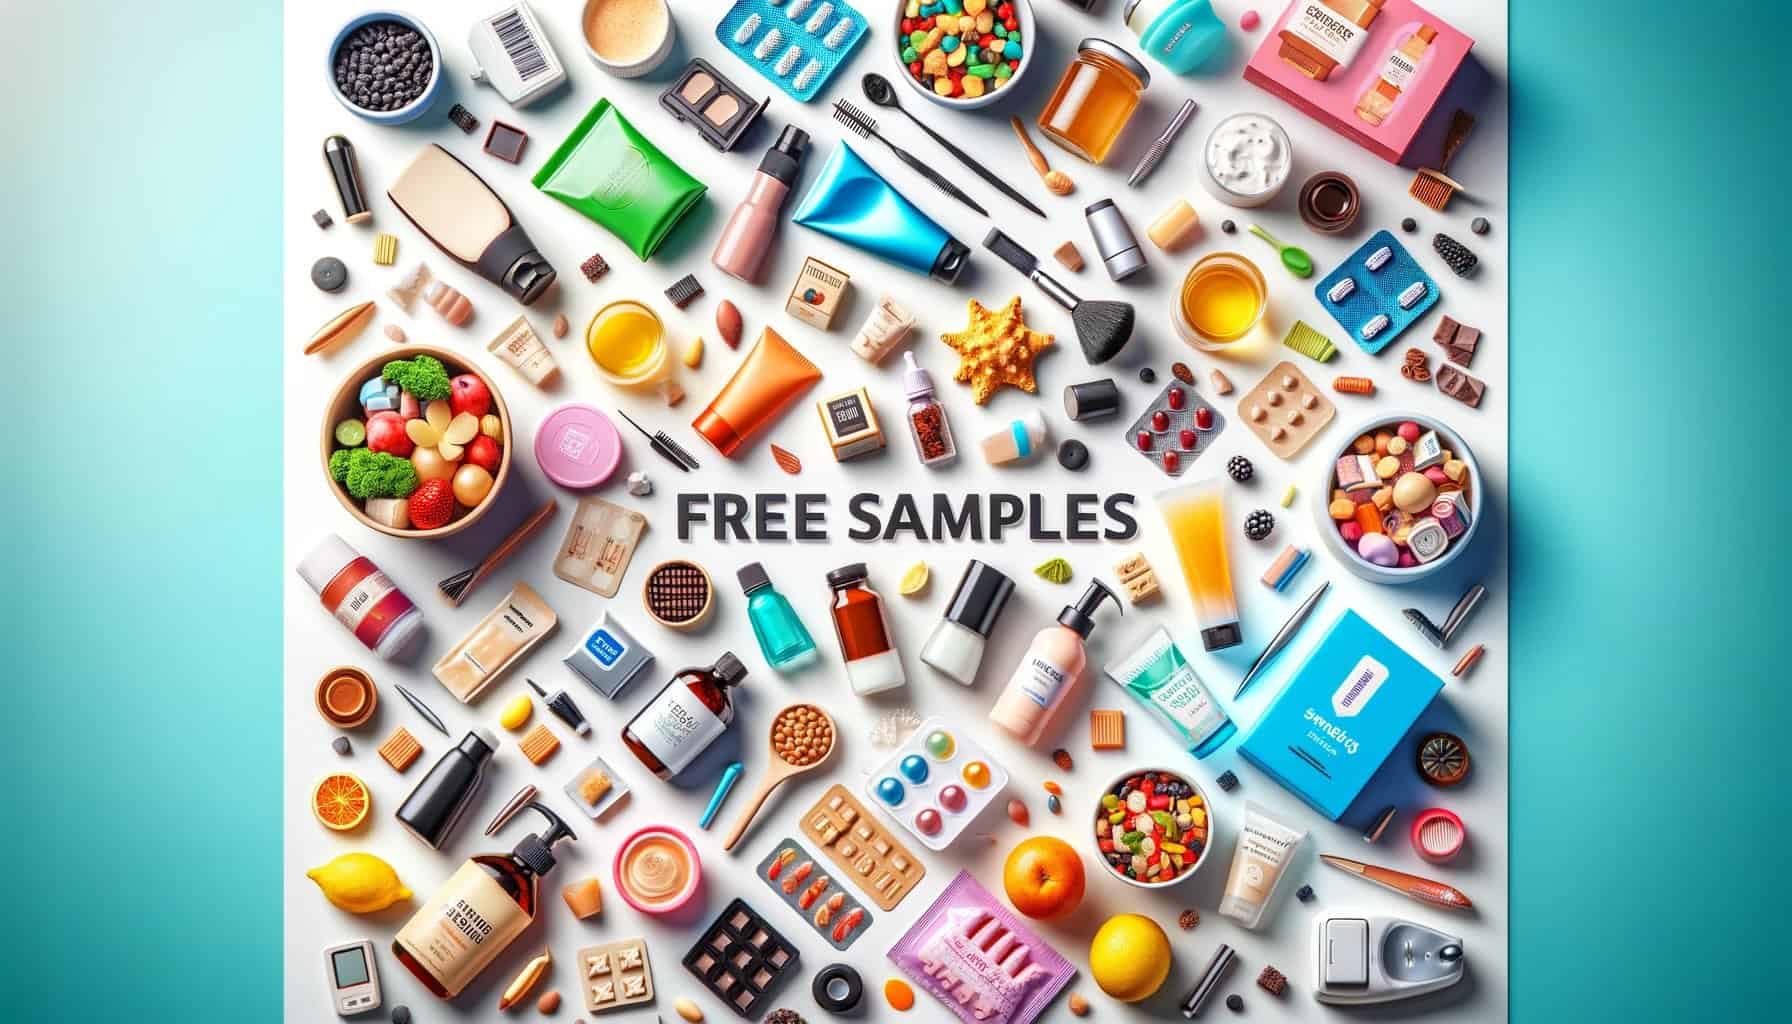 Free toy samples worldwide